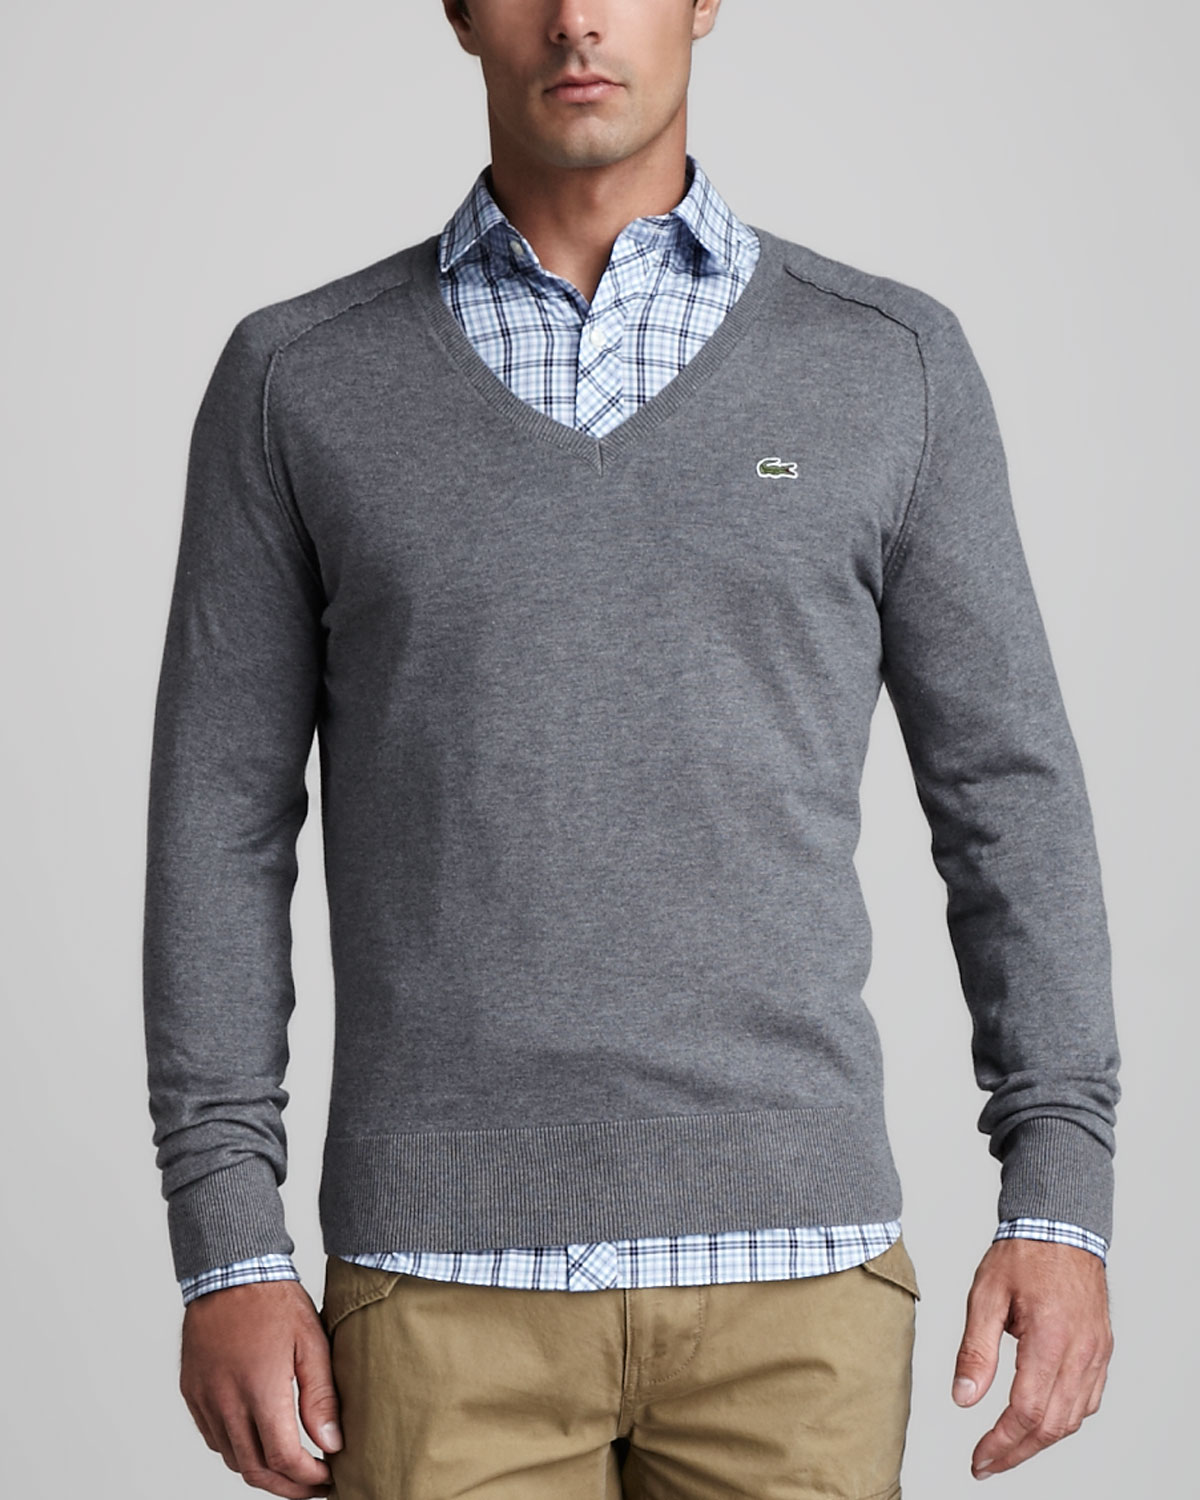 Lyst - Lacoste Cotton Cashmere Raglan Sweater in Gray for Men